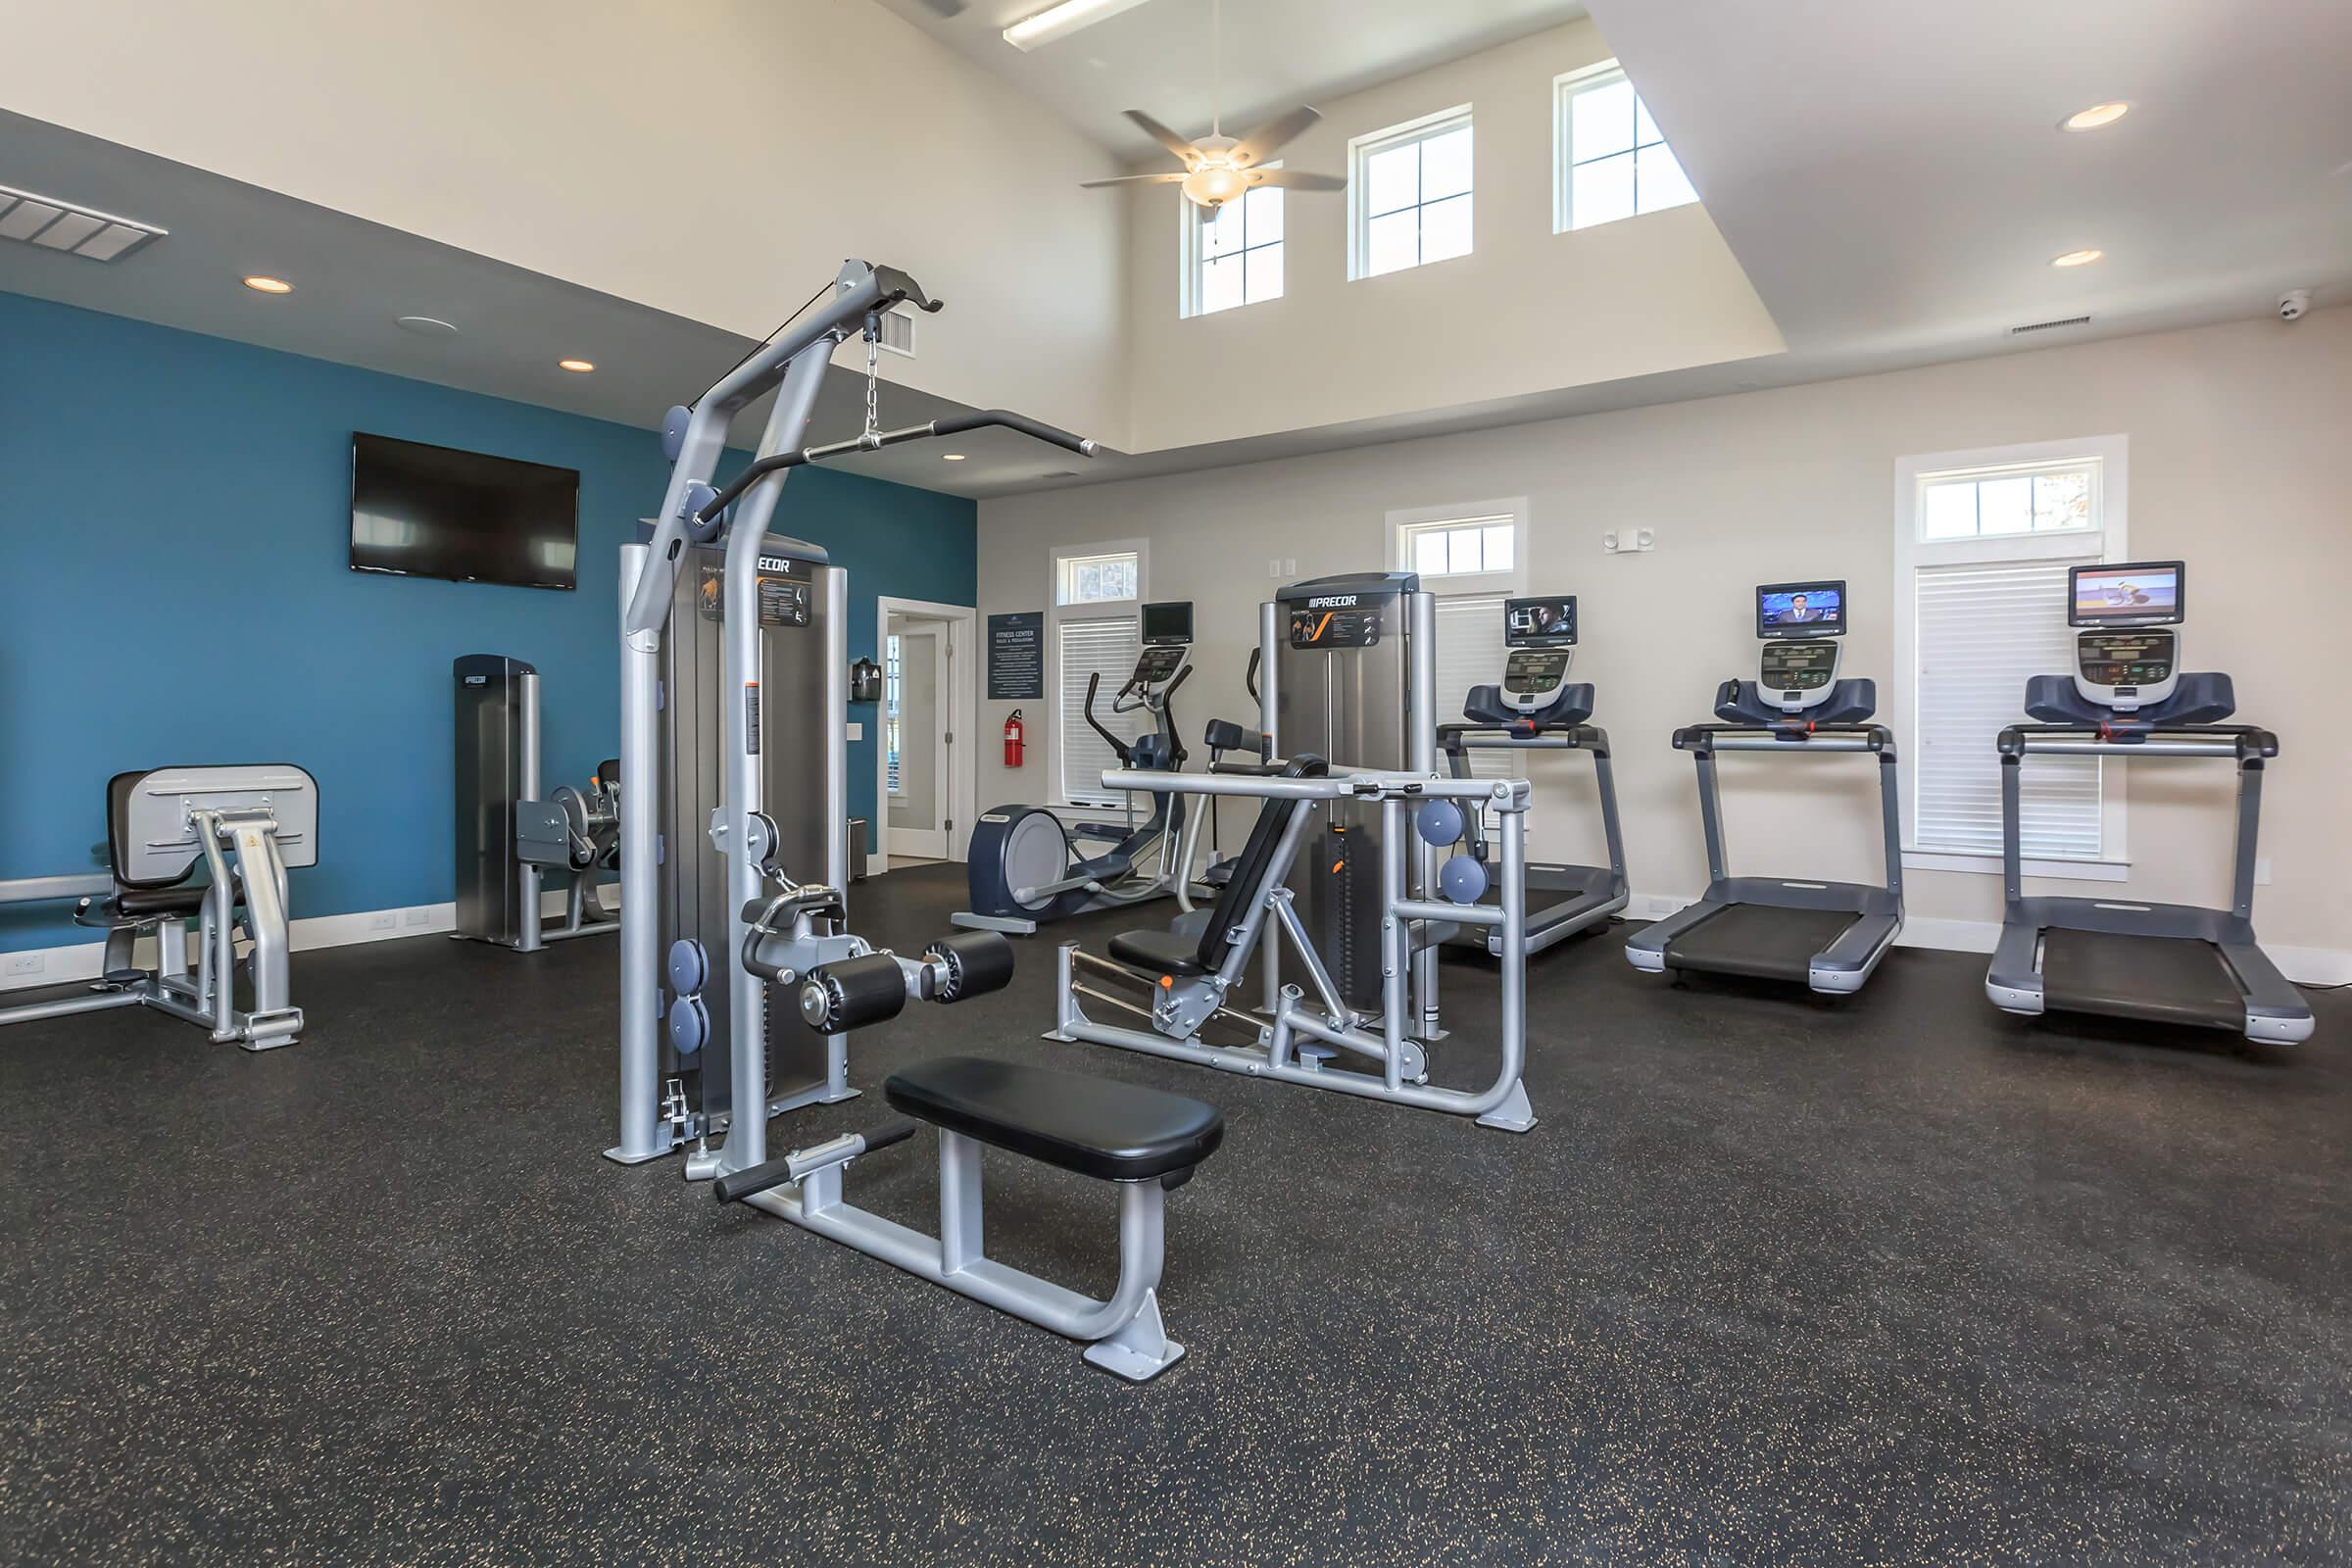 Get In Shape At Riverstone Apartments At Long Shoals In Arden, NC